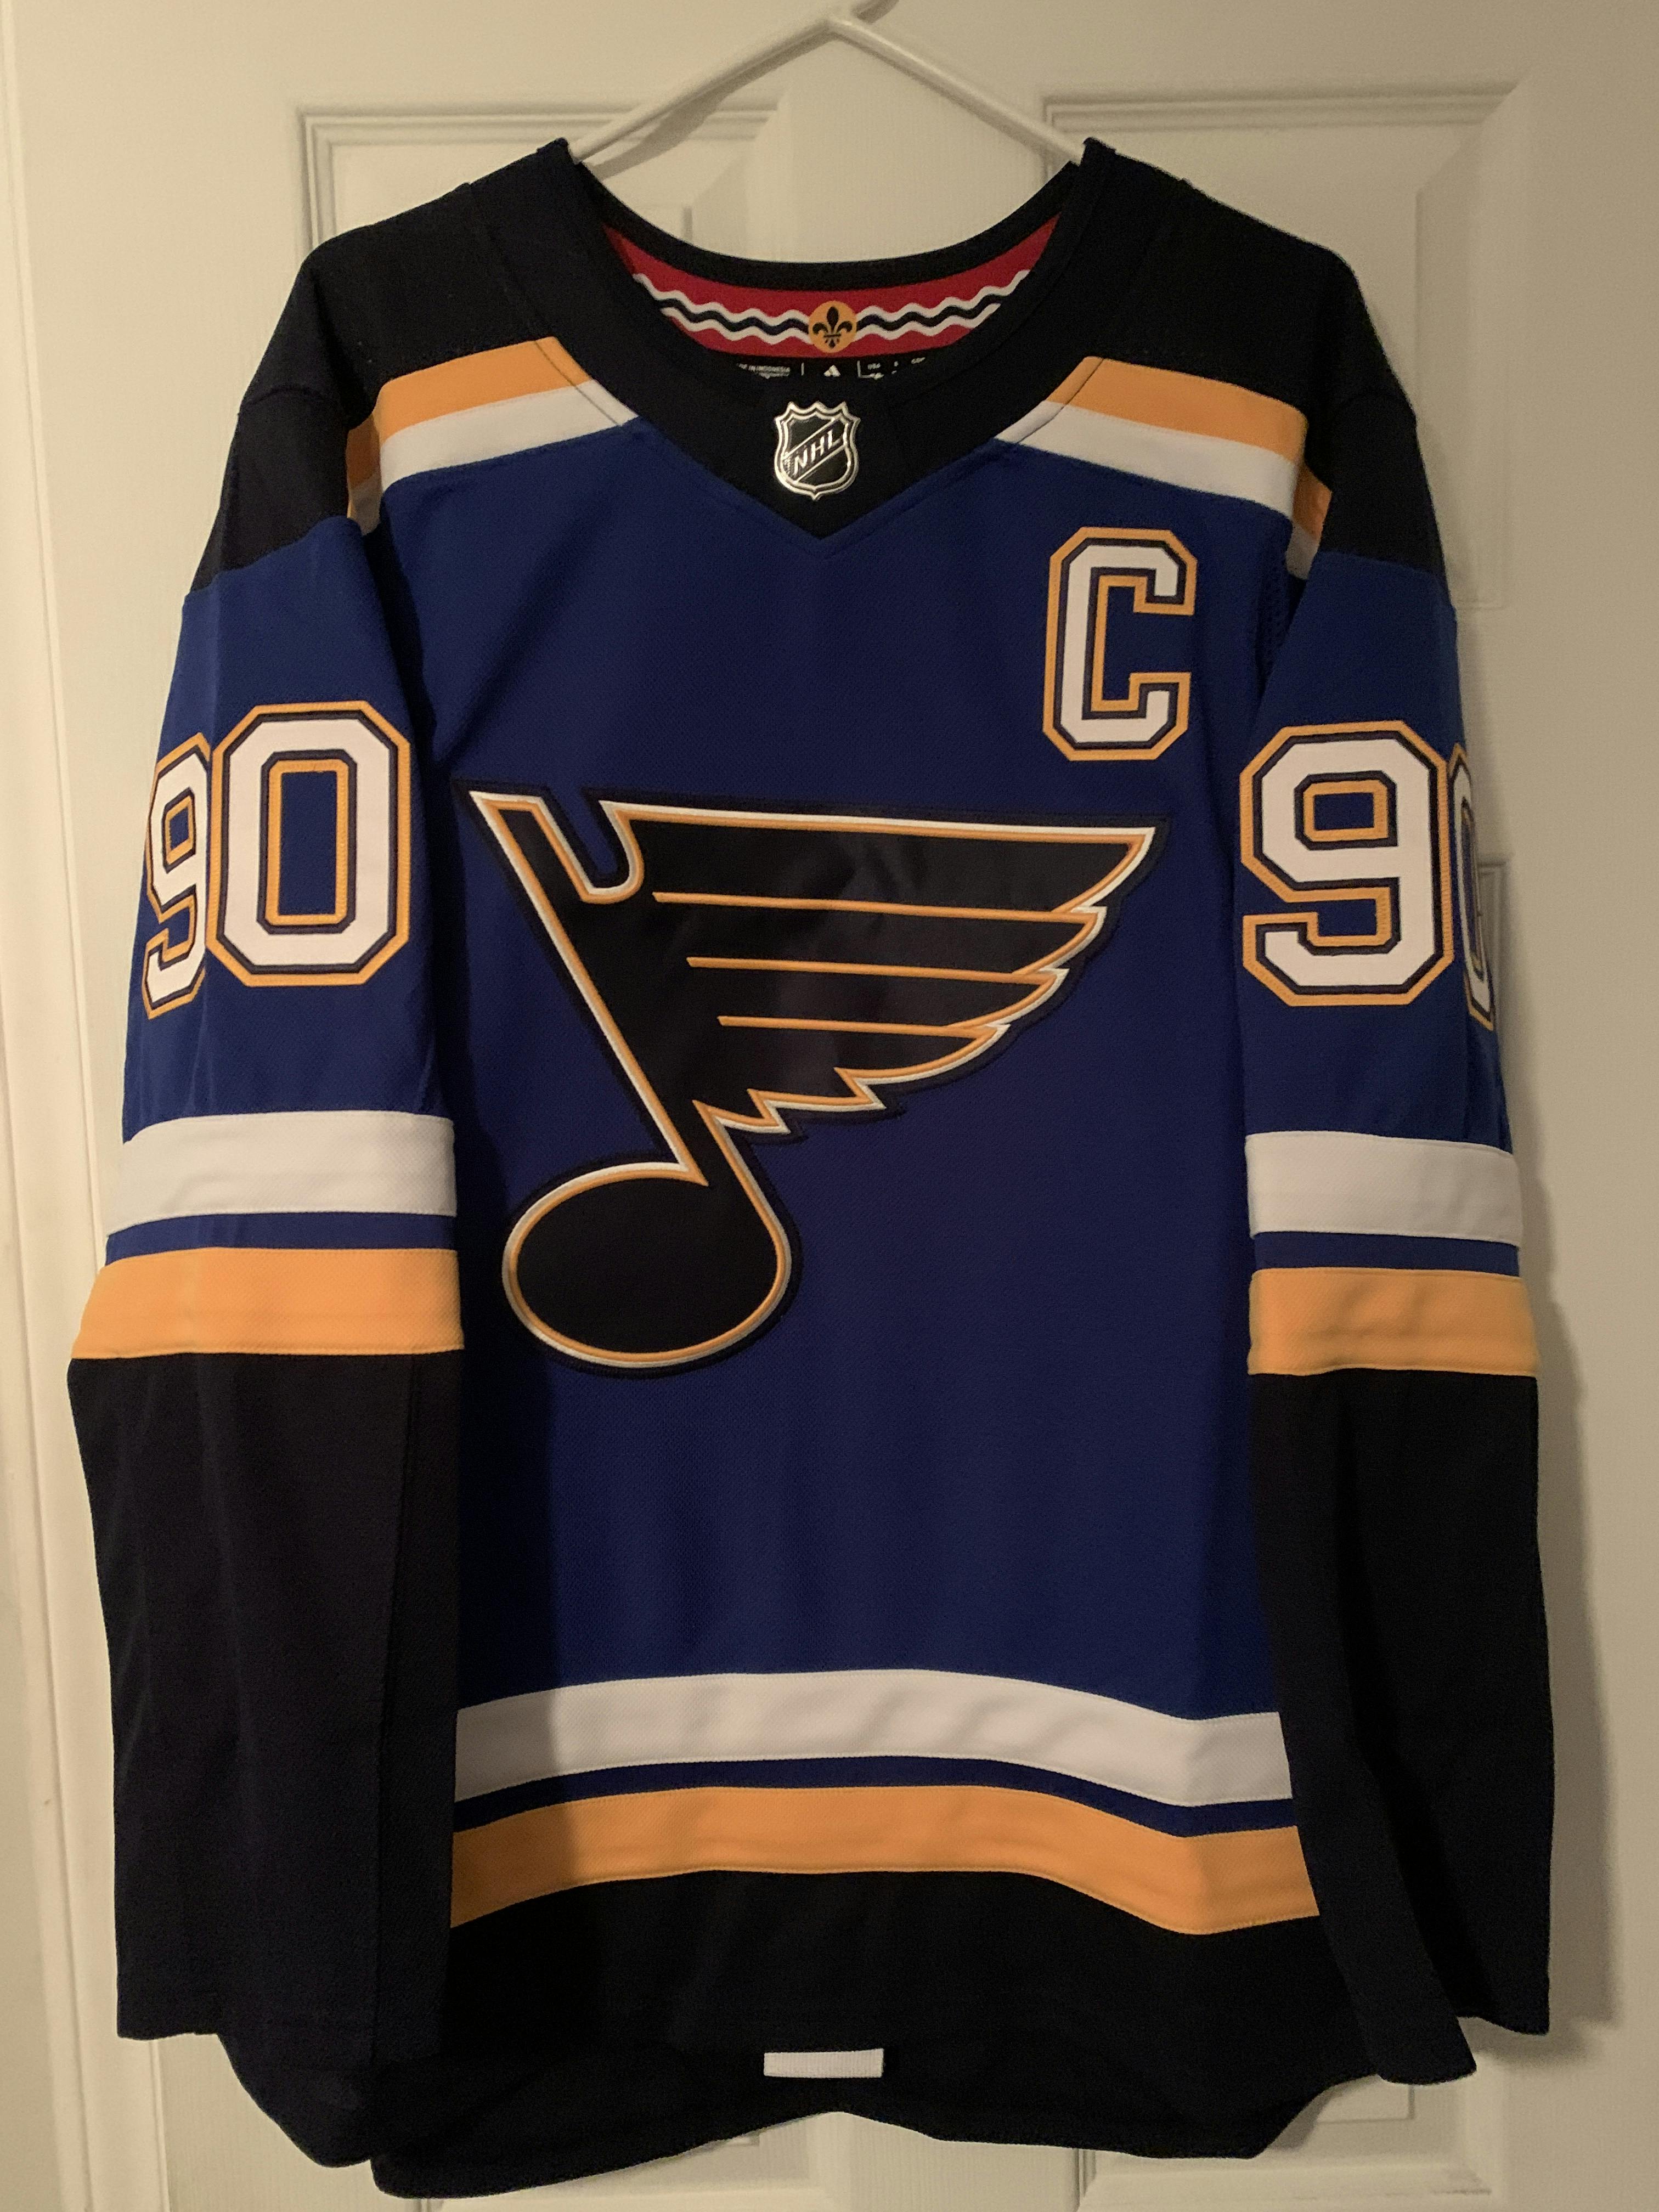 Adidas Aeroready Authentic St. Louis Blues Home Jersey Size 50